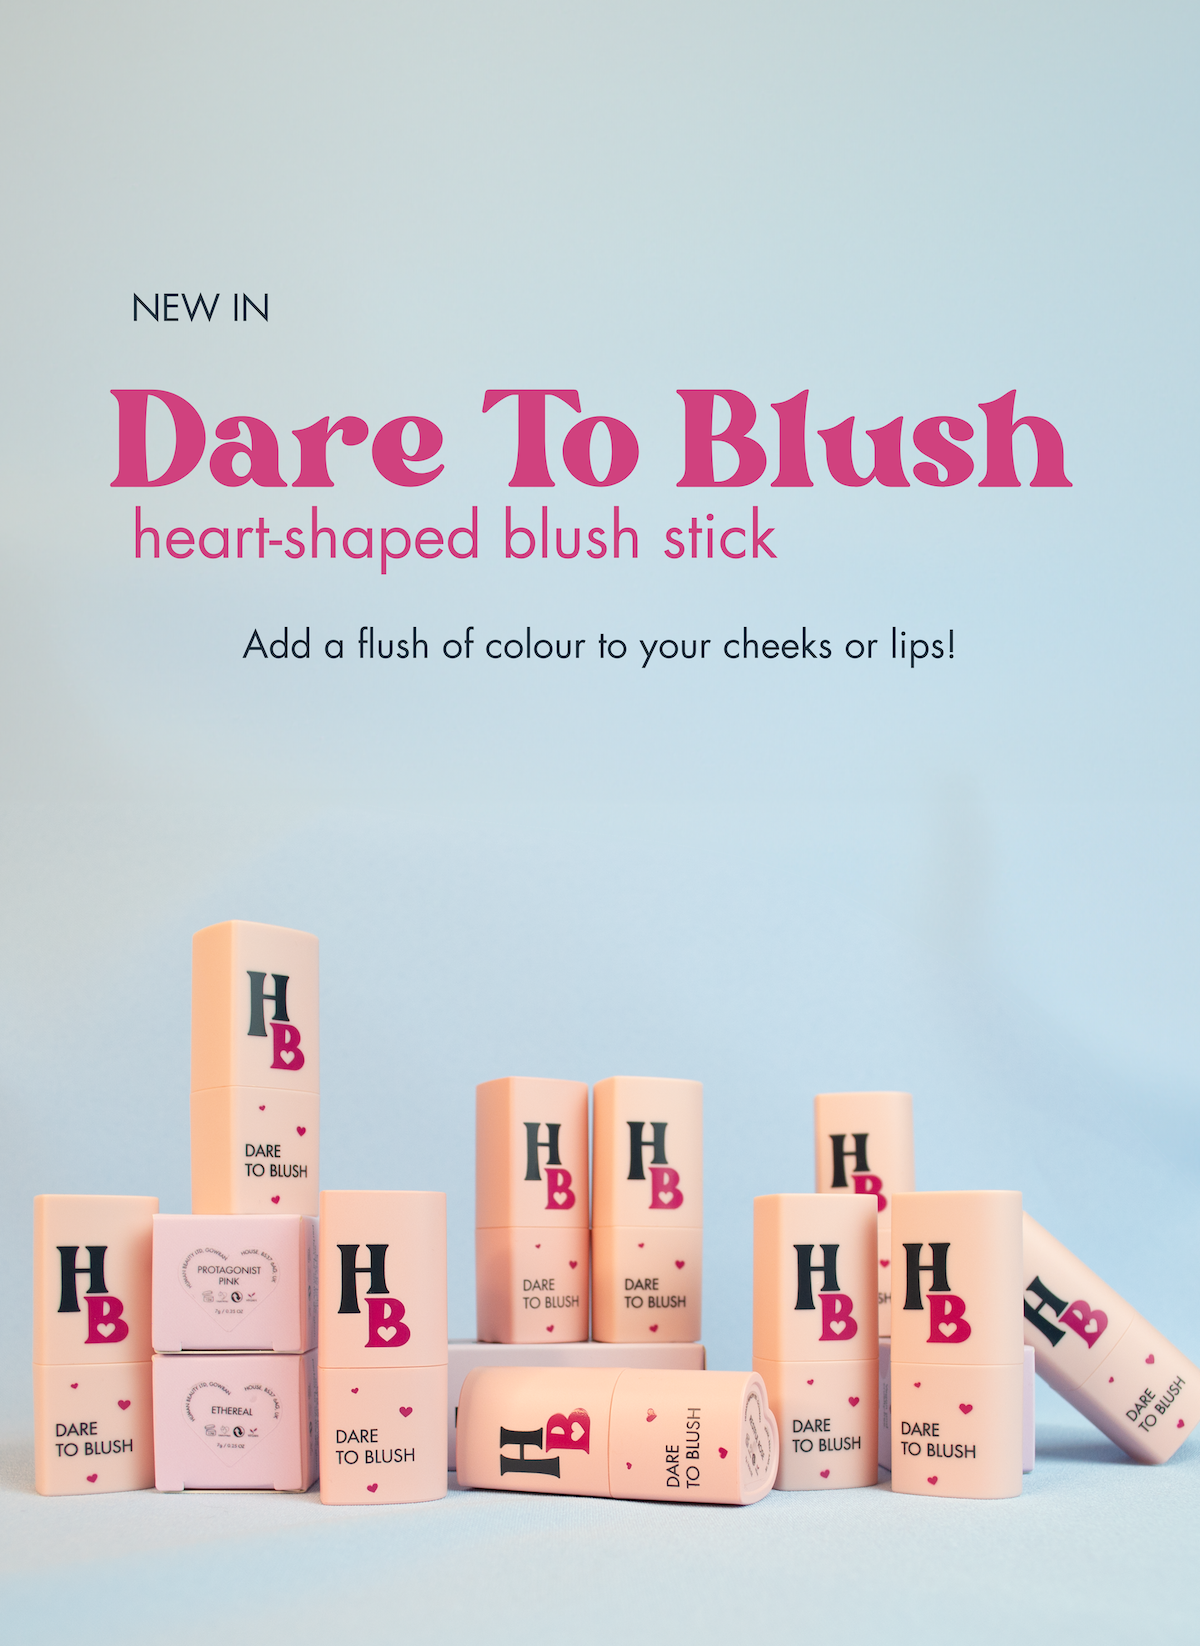 Visual of the entire blush collection with the text "New in: Dare To Blush heart-shaped blush stick - add a flush of colour to your cheeks and lips!"